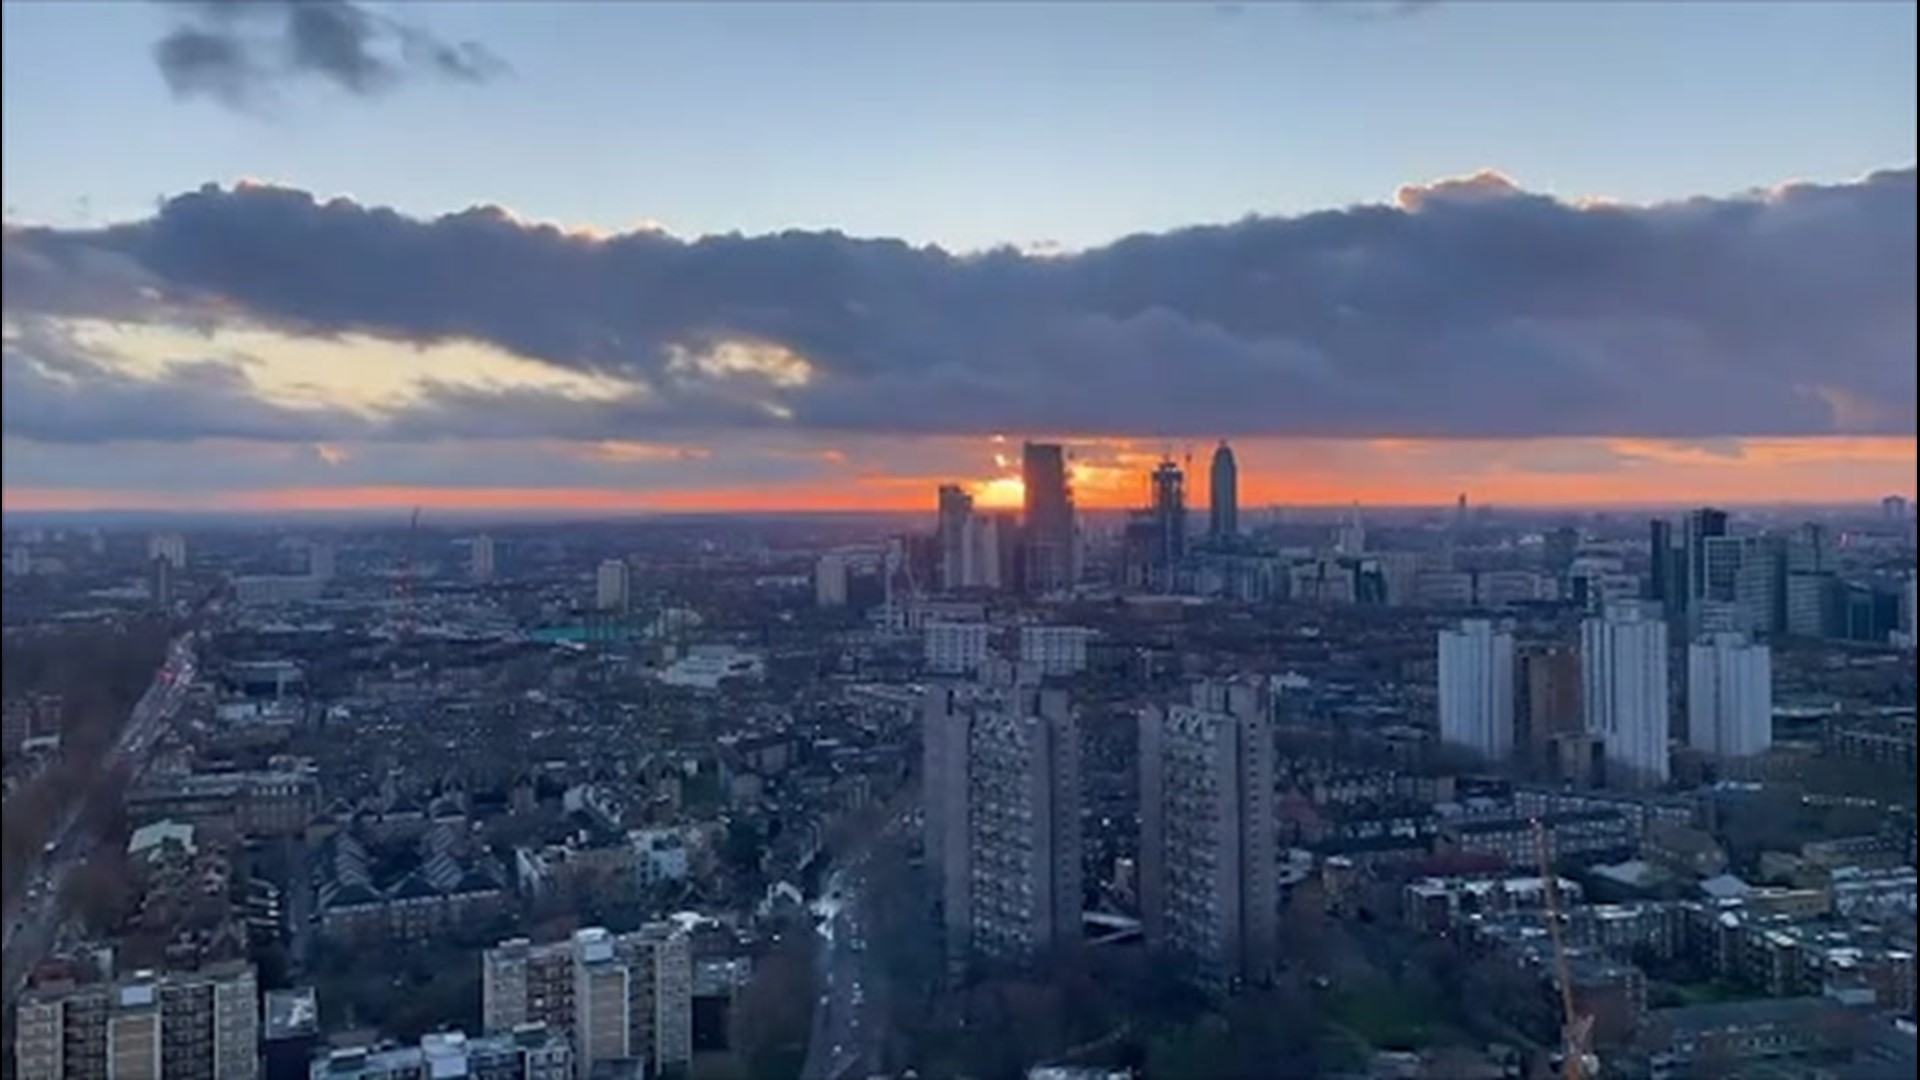 On Jan. 23, the sunset in London, England, shined a gorgeous orange color that proved a stunning view.